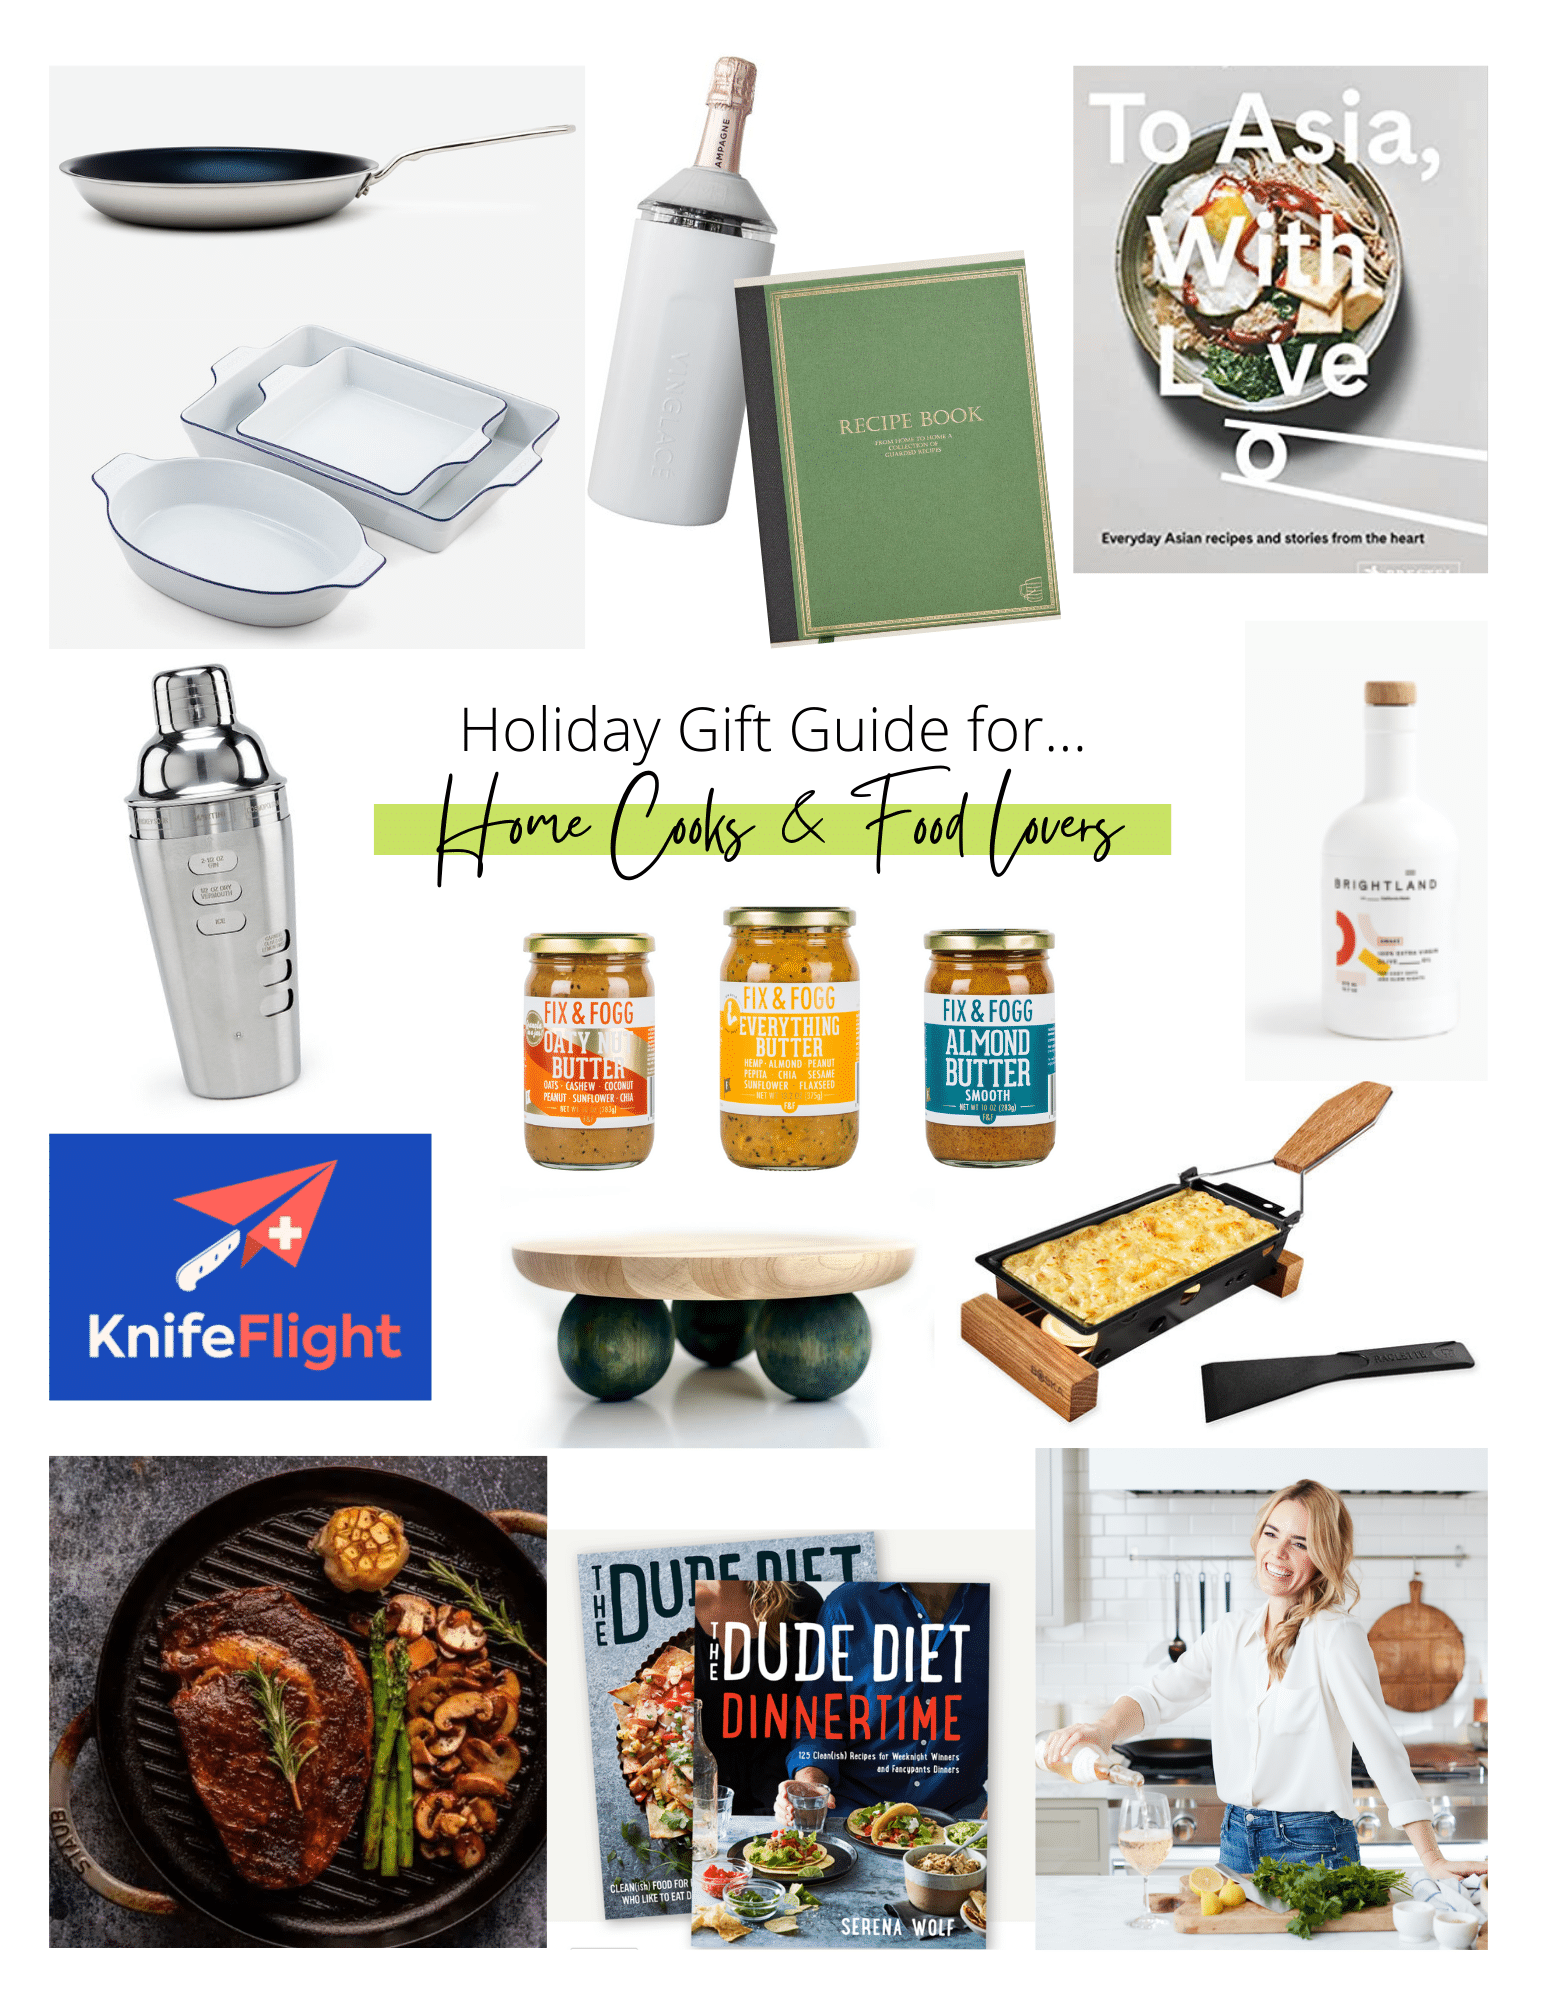 Holiday Christmas Gift Guide and Ideas for Home Cooks